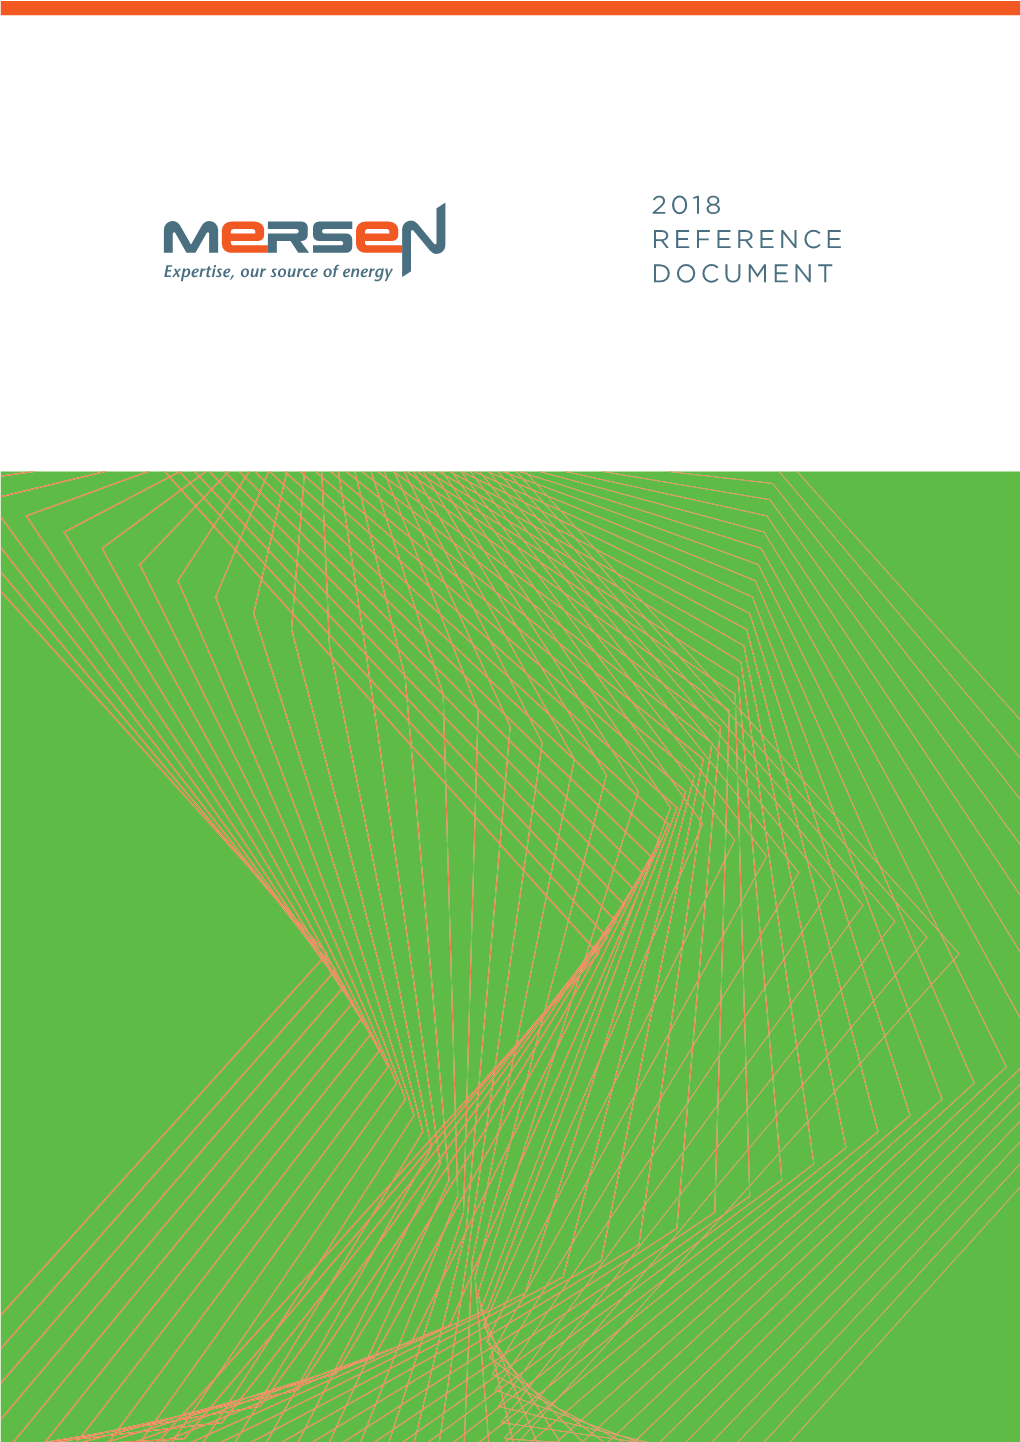 MERSEN 2018 Reference Document